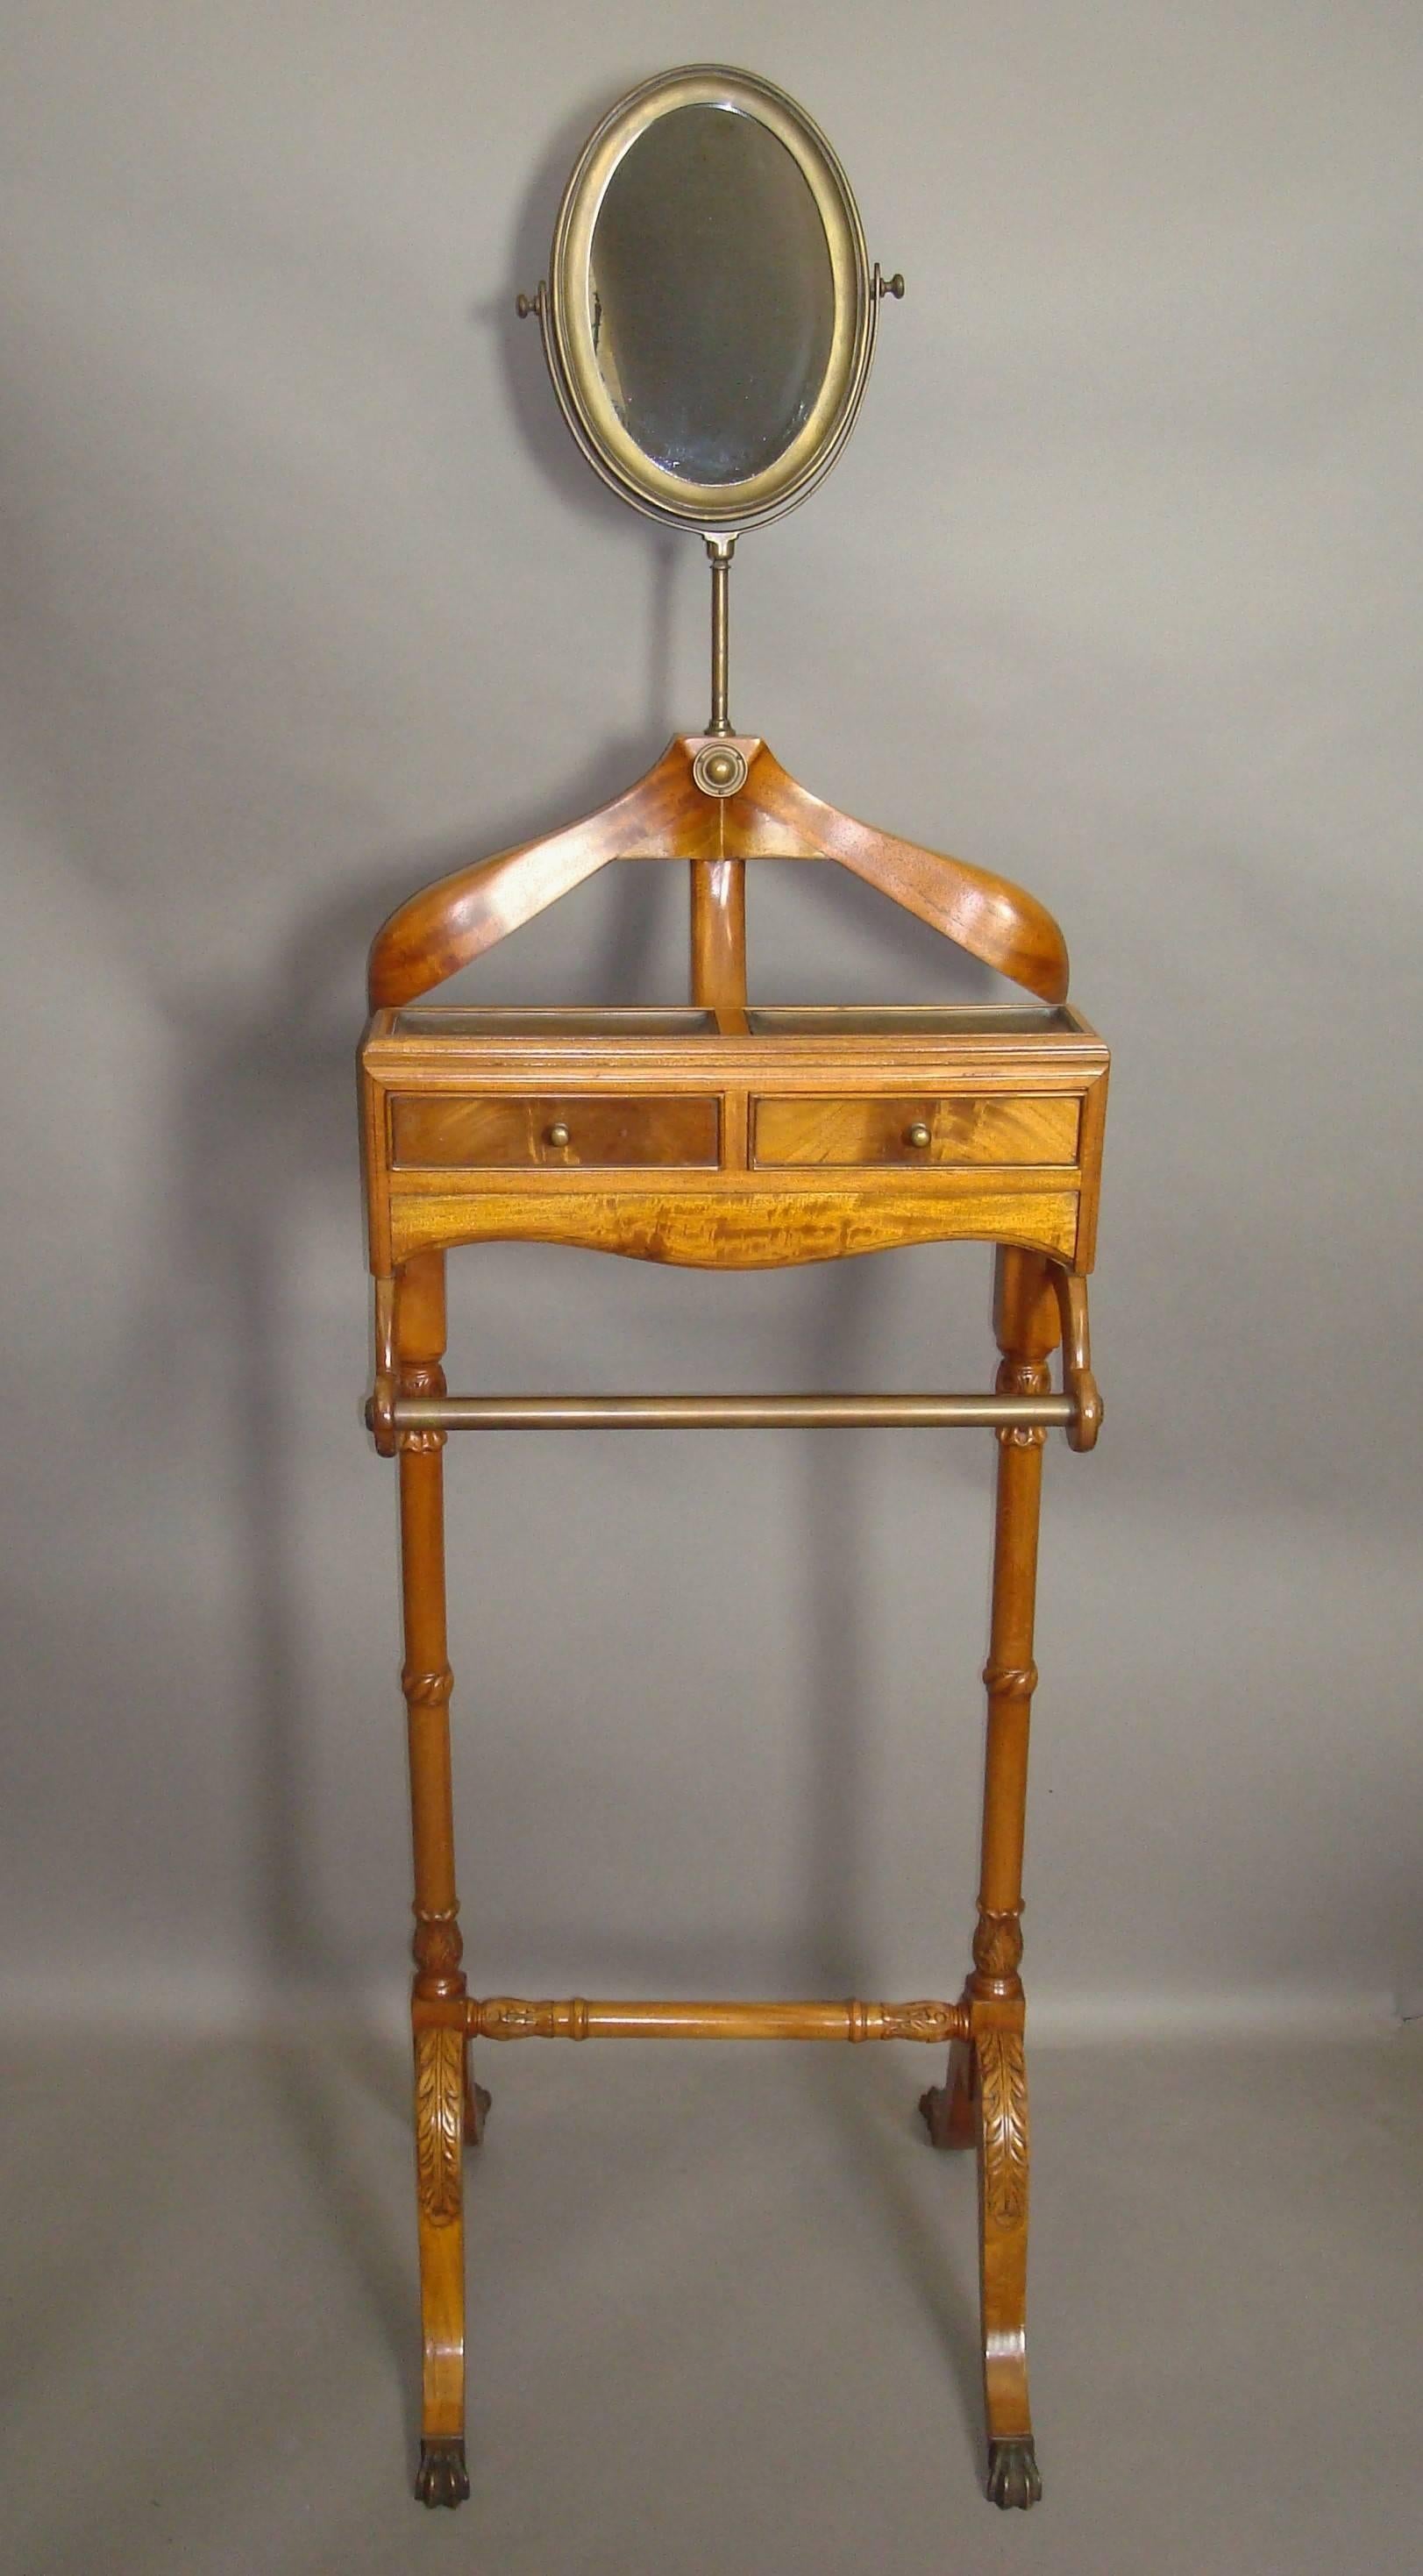 Good 20th century figured mahogany gentleman's valet stand; the swivel oval mirror in a brass moulded frame, raised on a brass support above the substantial shaped jacket hanger. The main compartment with two small drawers and two brass dished trays